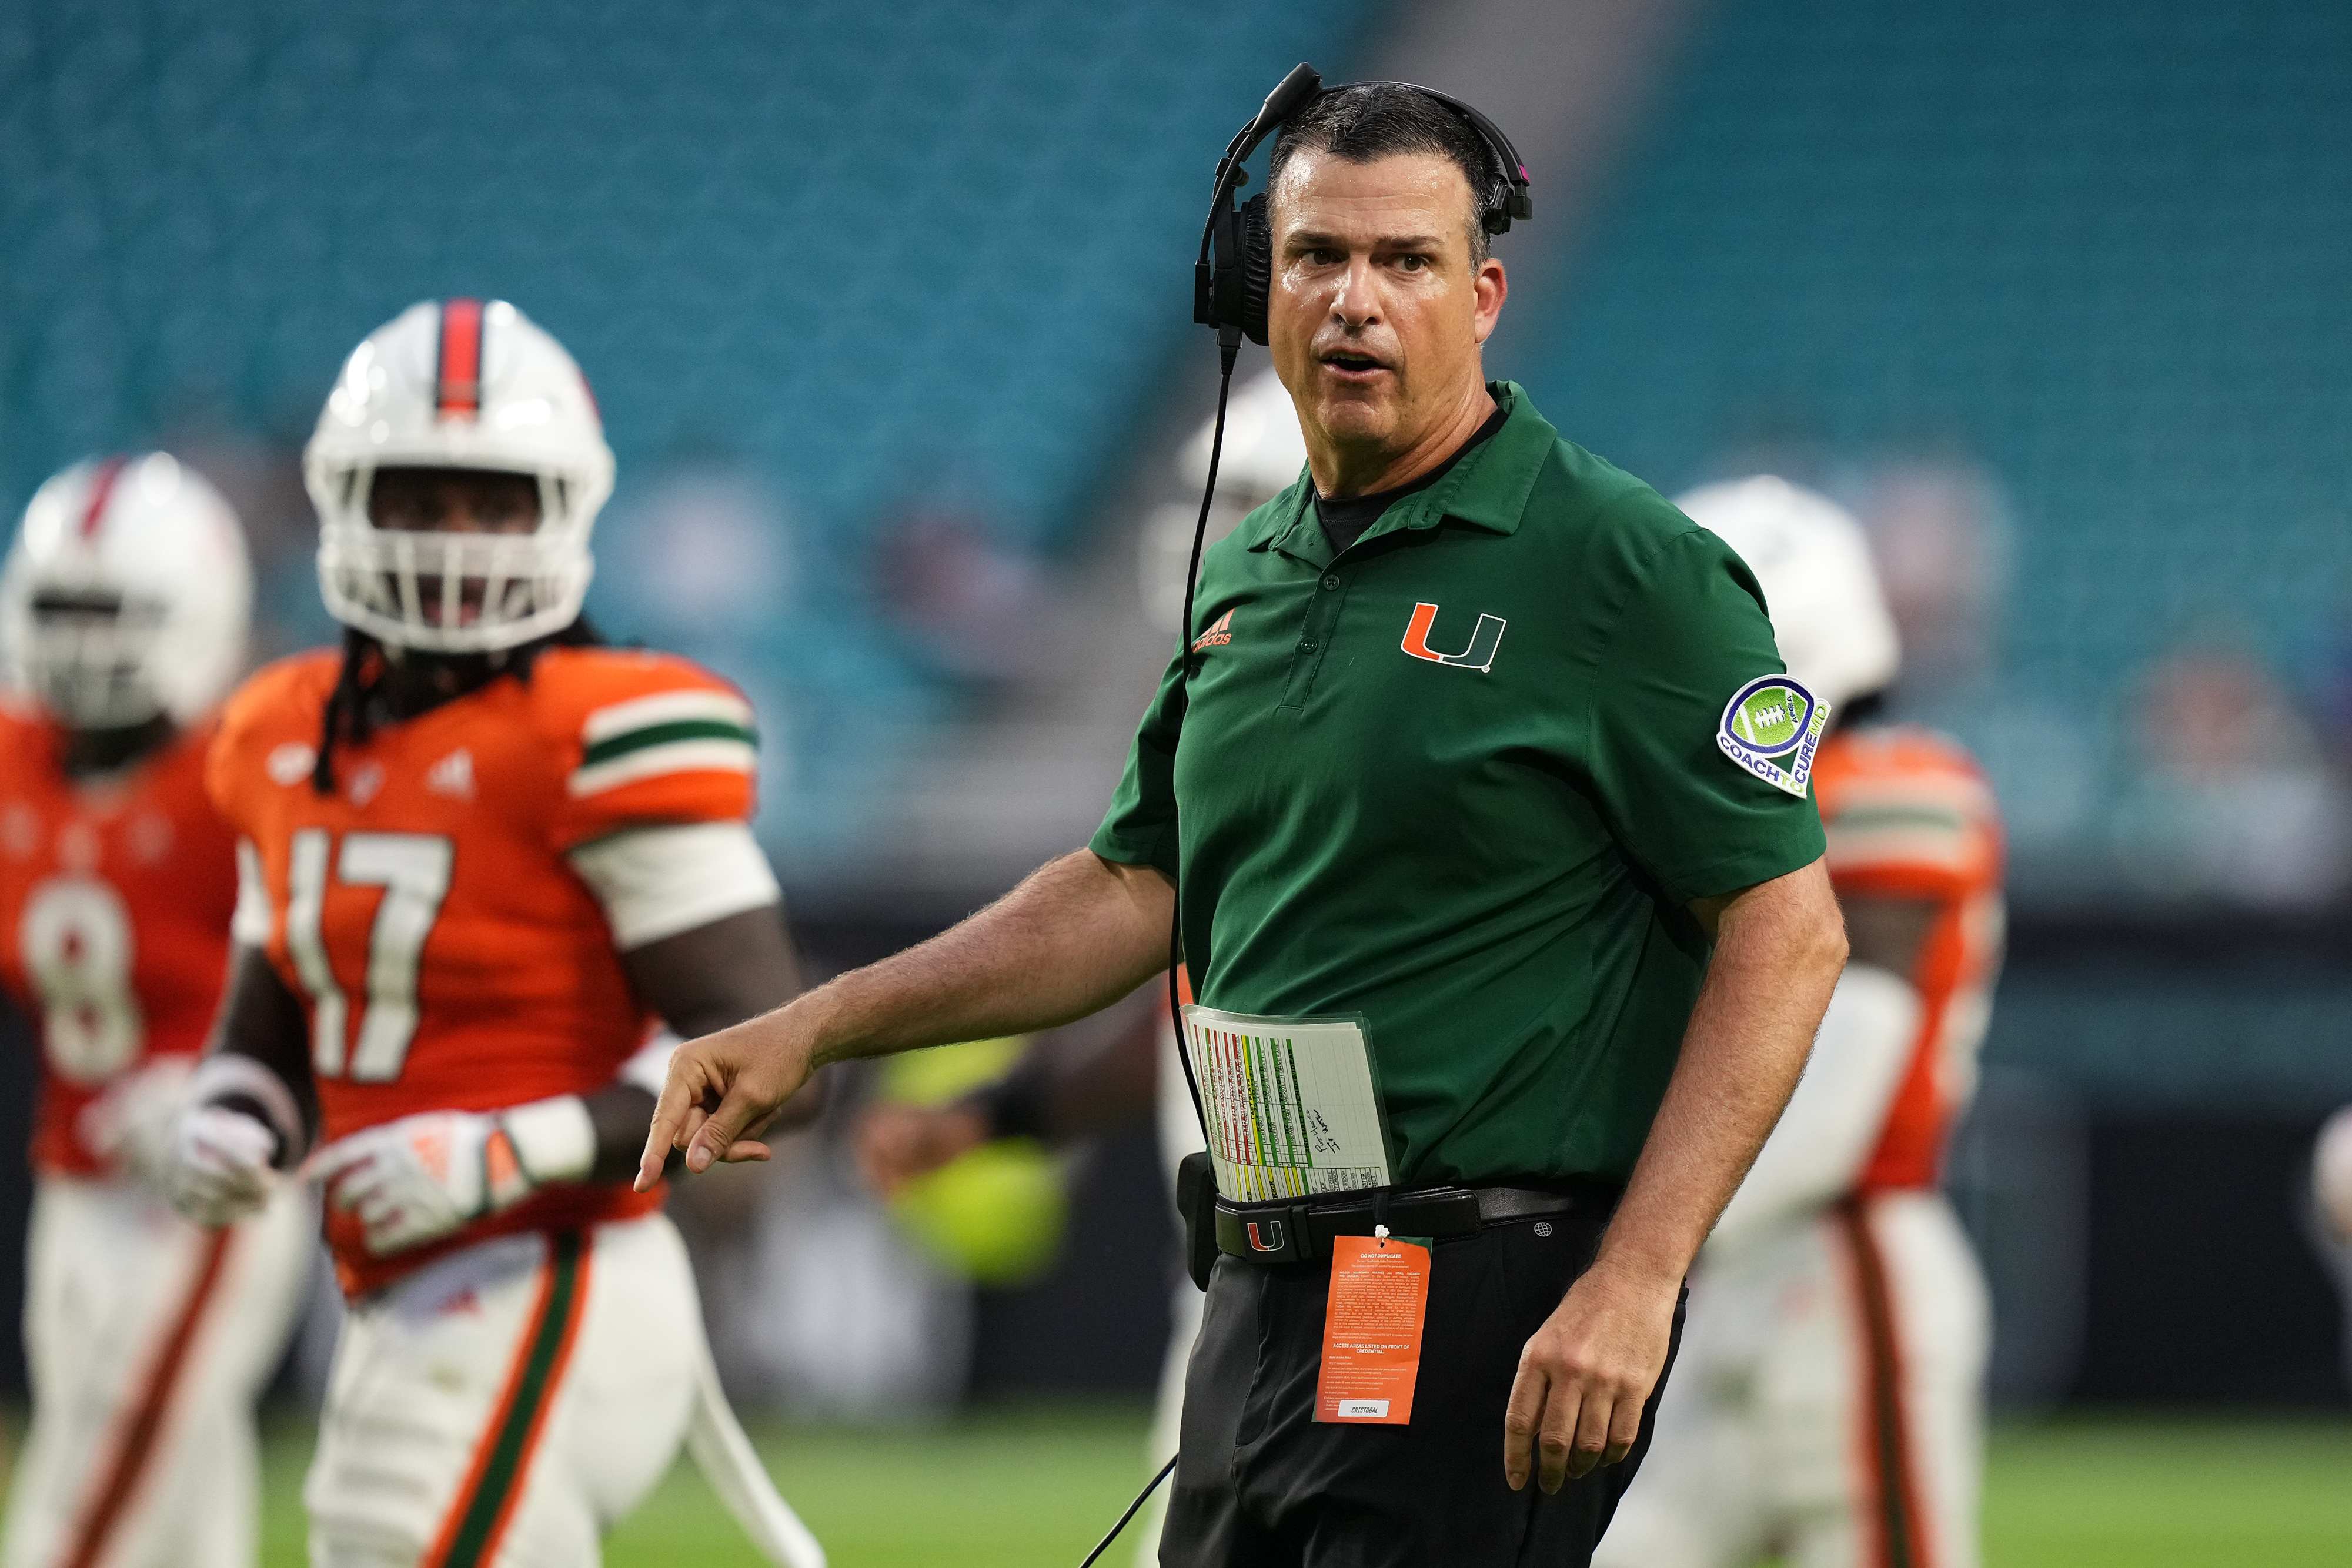 NCAA Football: Middle Tennessee at Miami